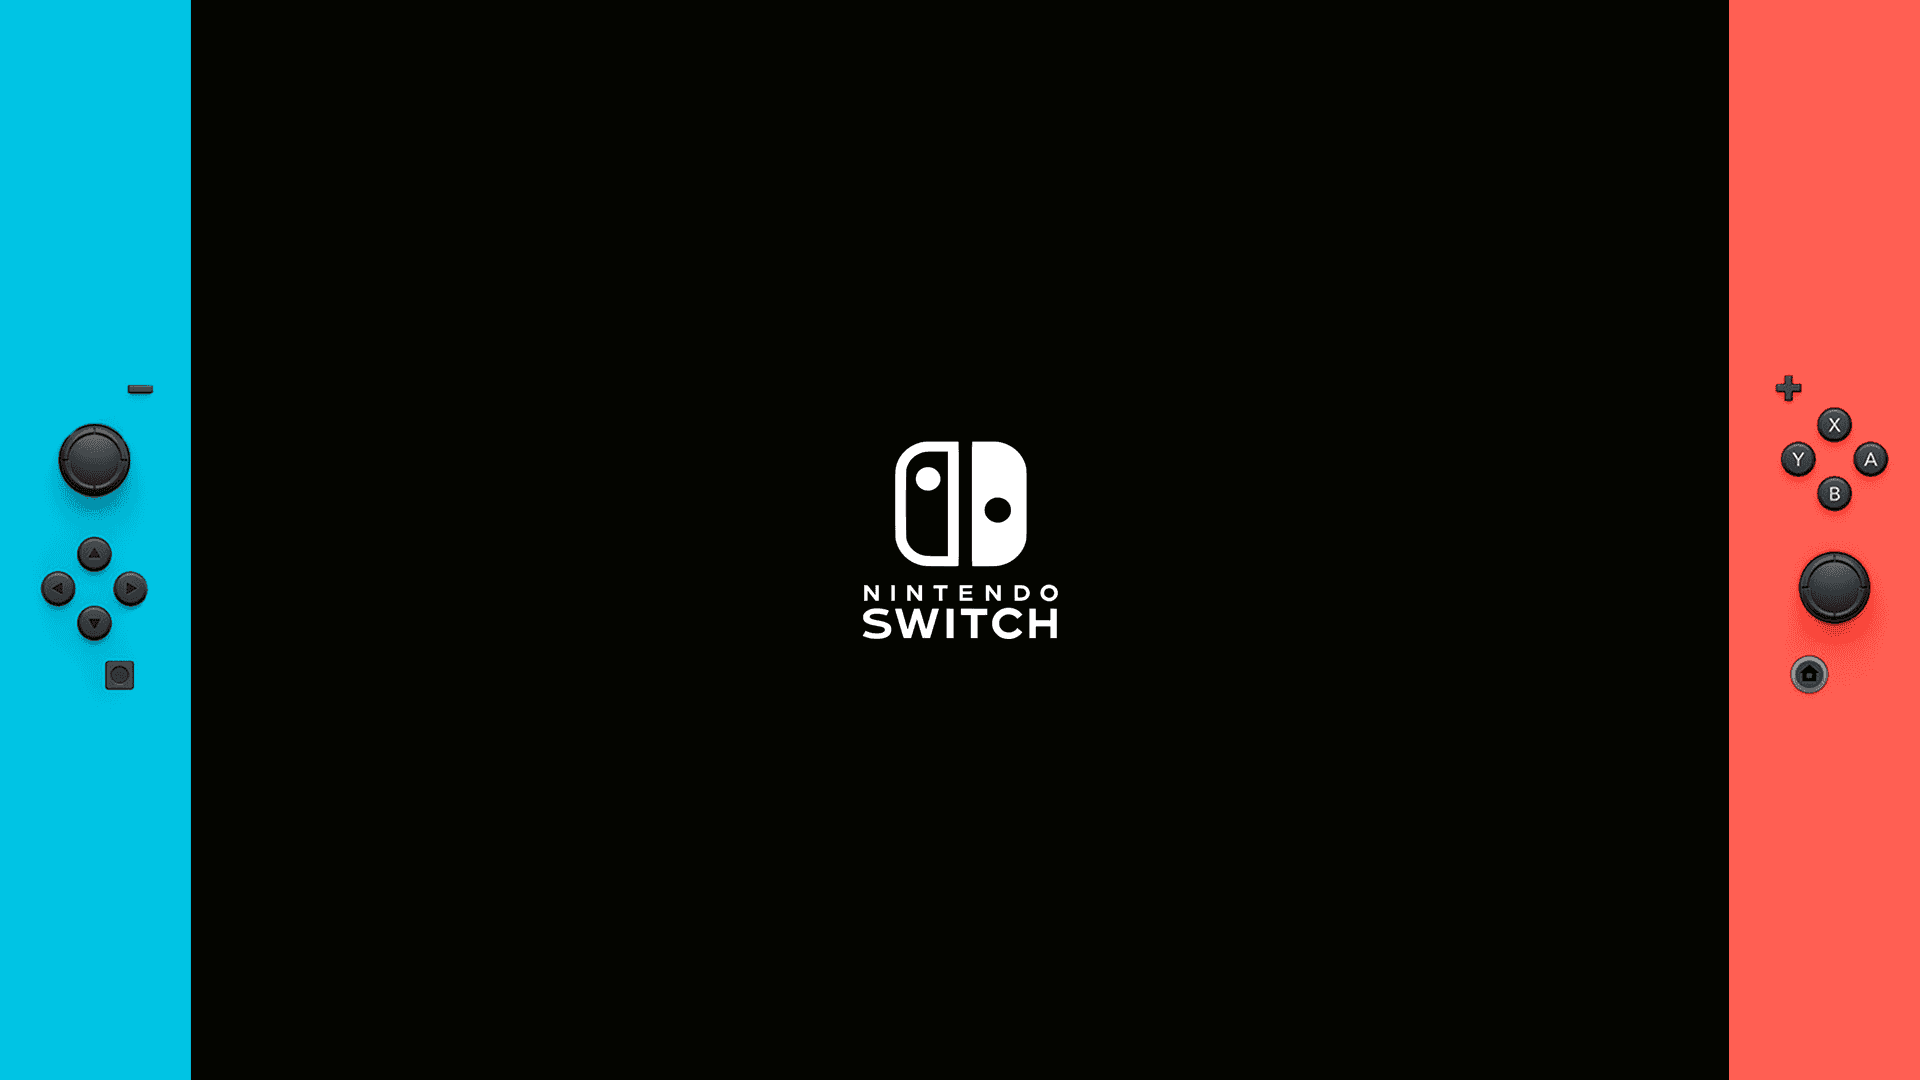 All aboard the Nintendo Switch!